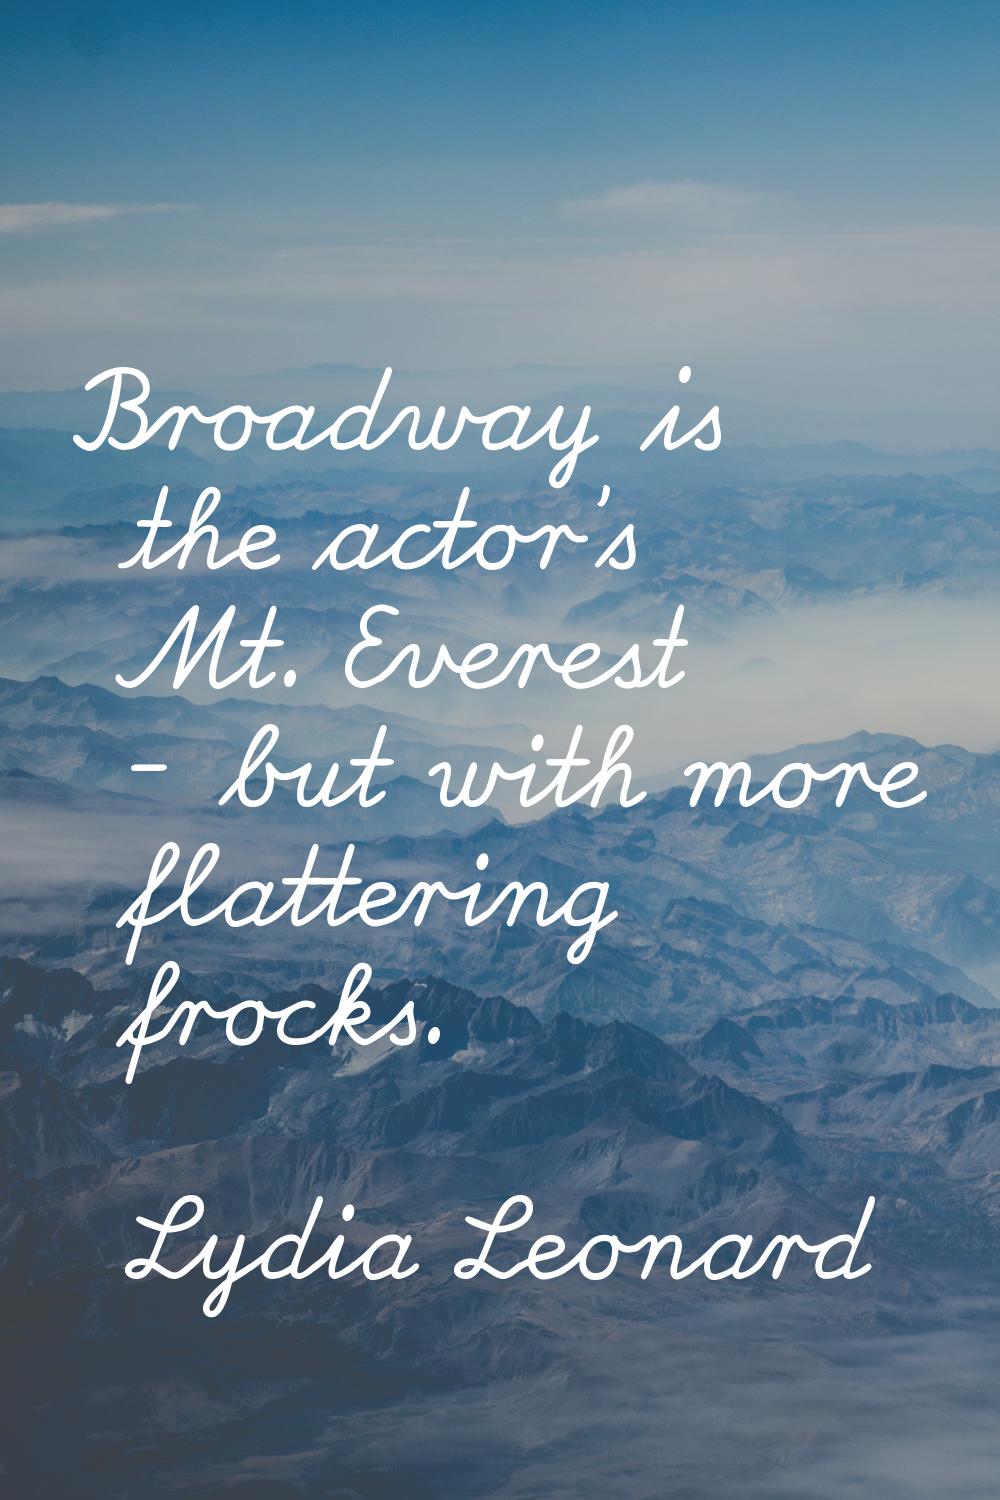 Broadway is the actor's Mt. Everest - but with more flattering frocks.